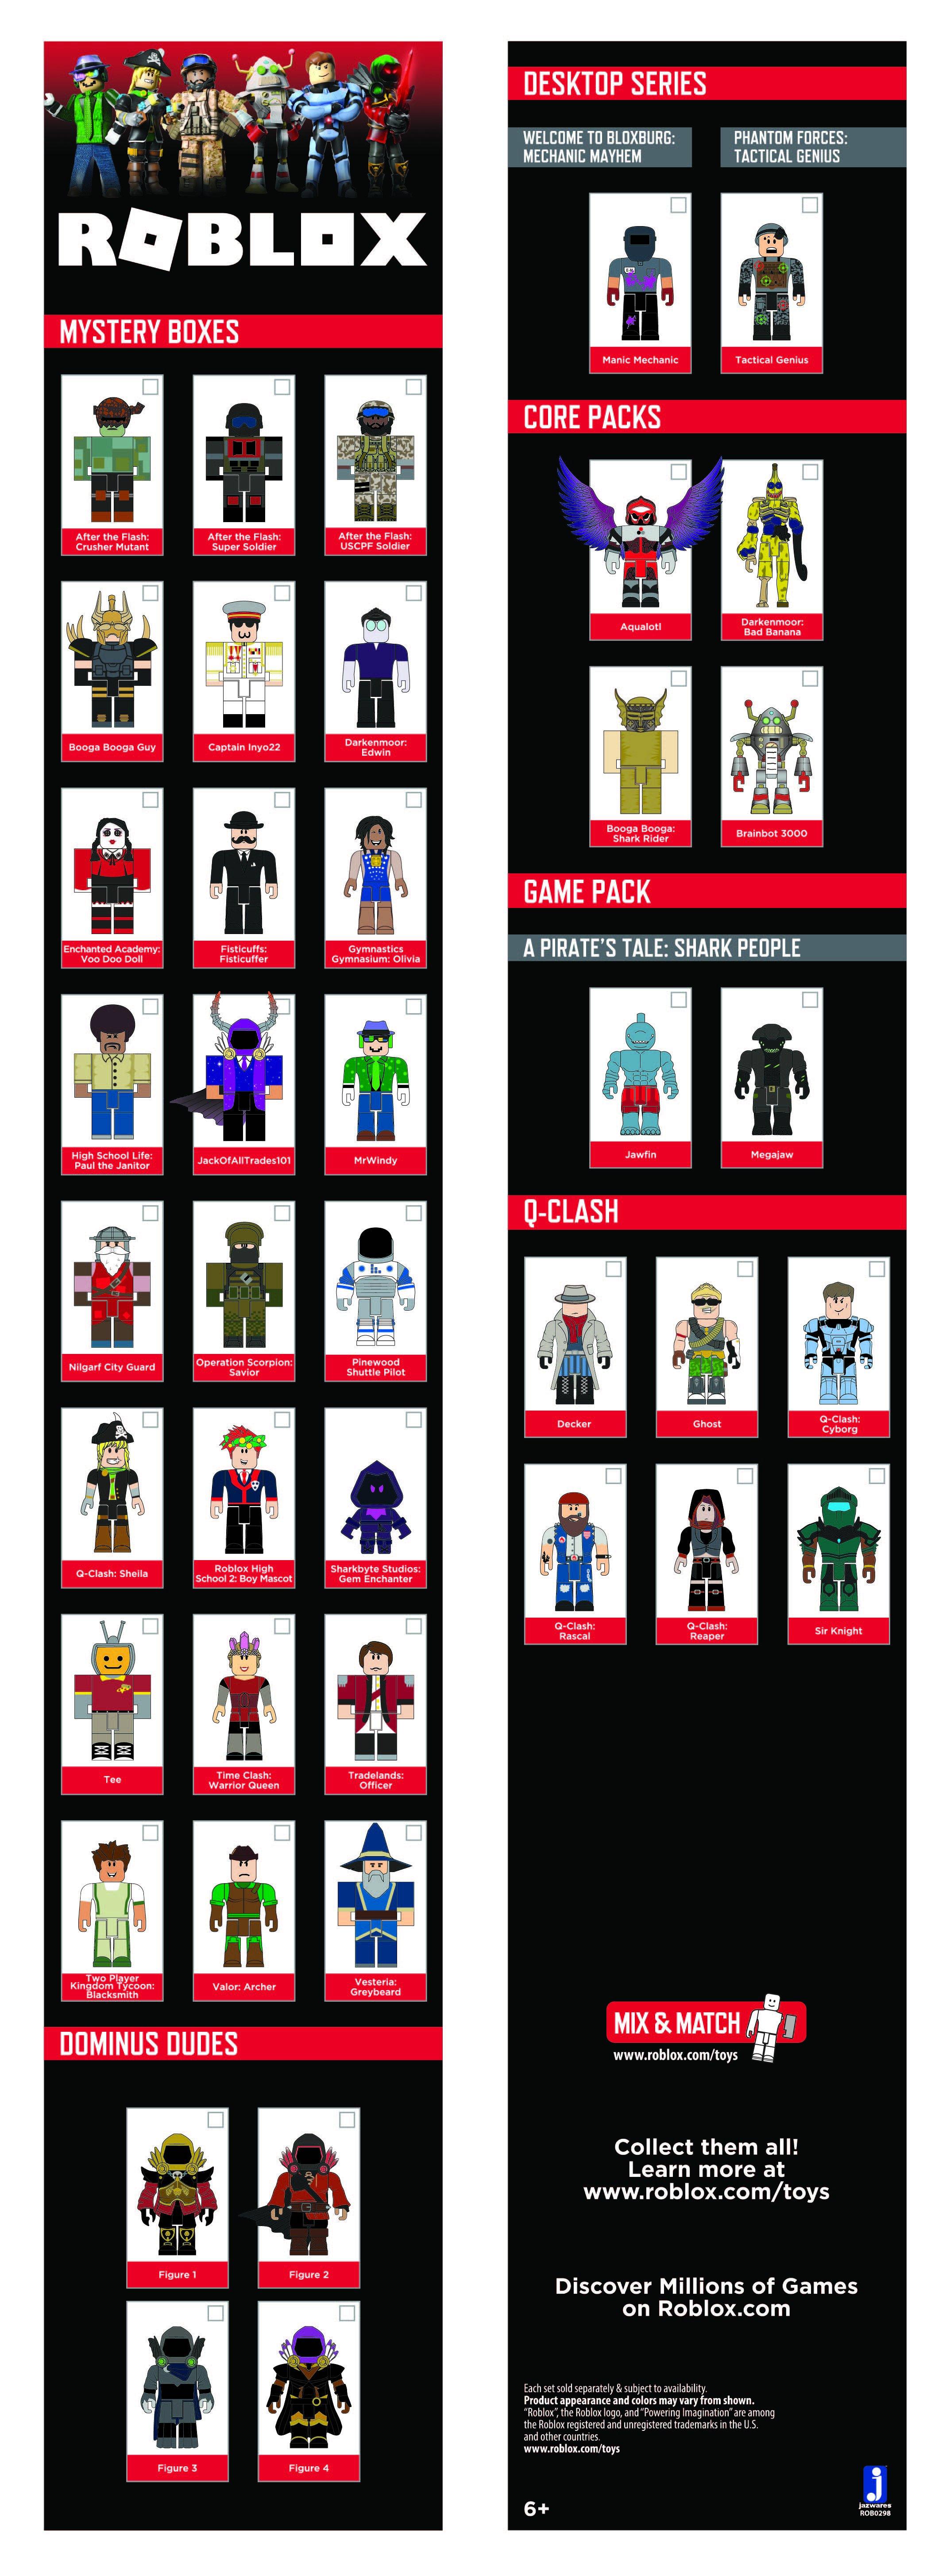 Roblox Action Collection Series 7 Mystery Figure Includes 1 Figure And Exclusive Virtual Item Gamestop - exclusive virtual item roblox